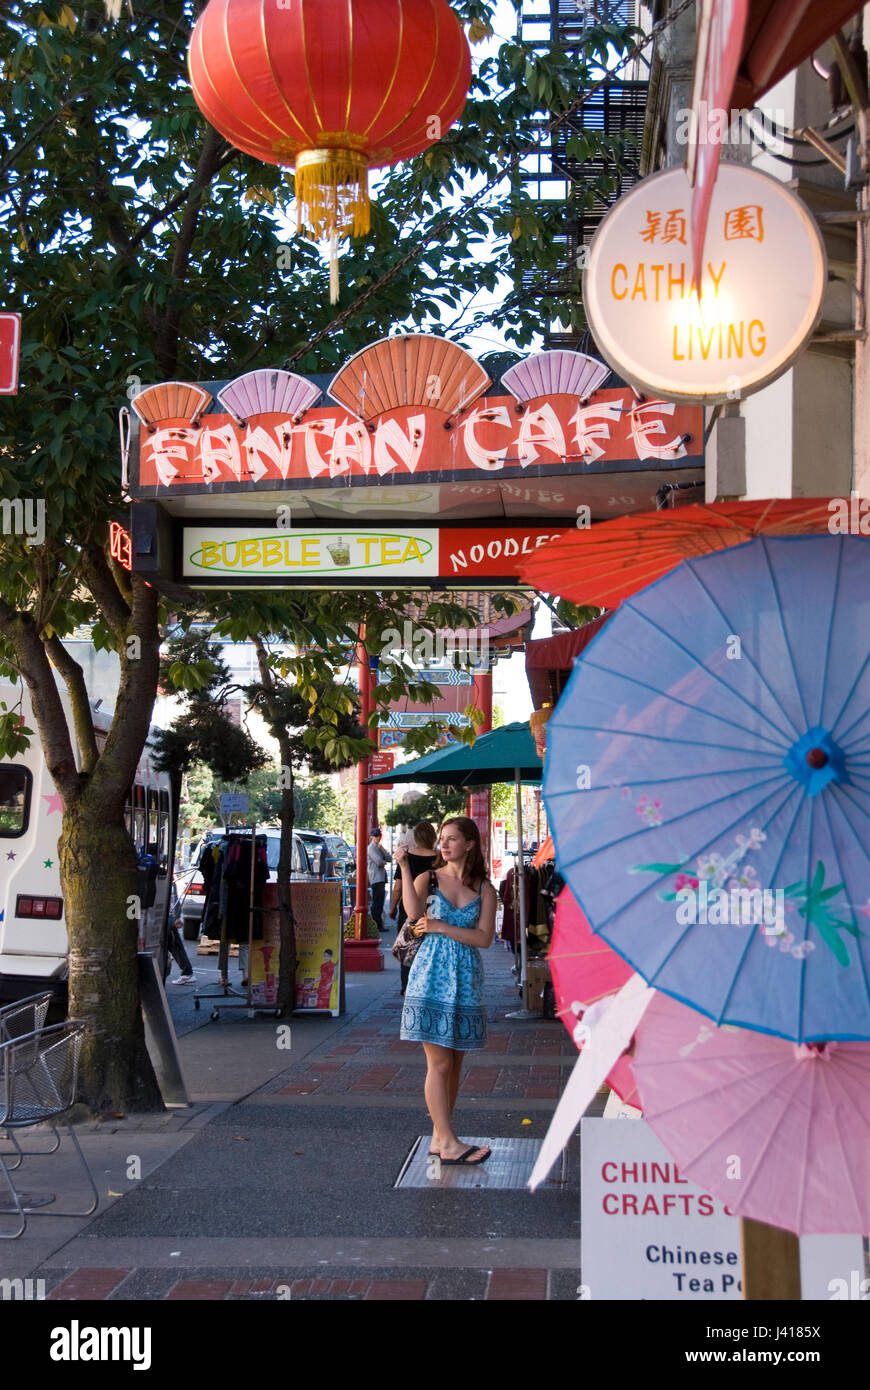 The Fan Tan Cafe near Fan Tan Alley in Victoria's (British Columbia) Chinatown, the oldest in Canada and second to San Francisco's in North America. Stock Photo